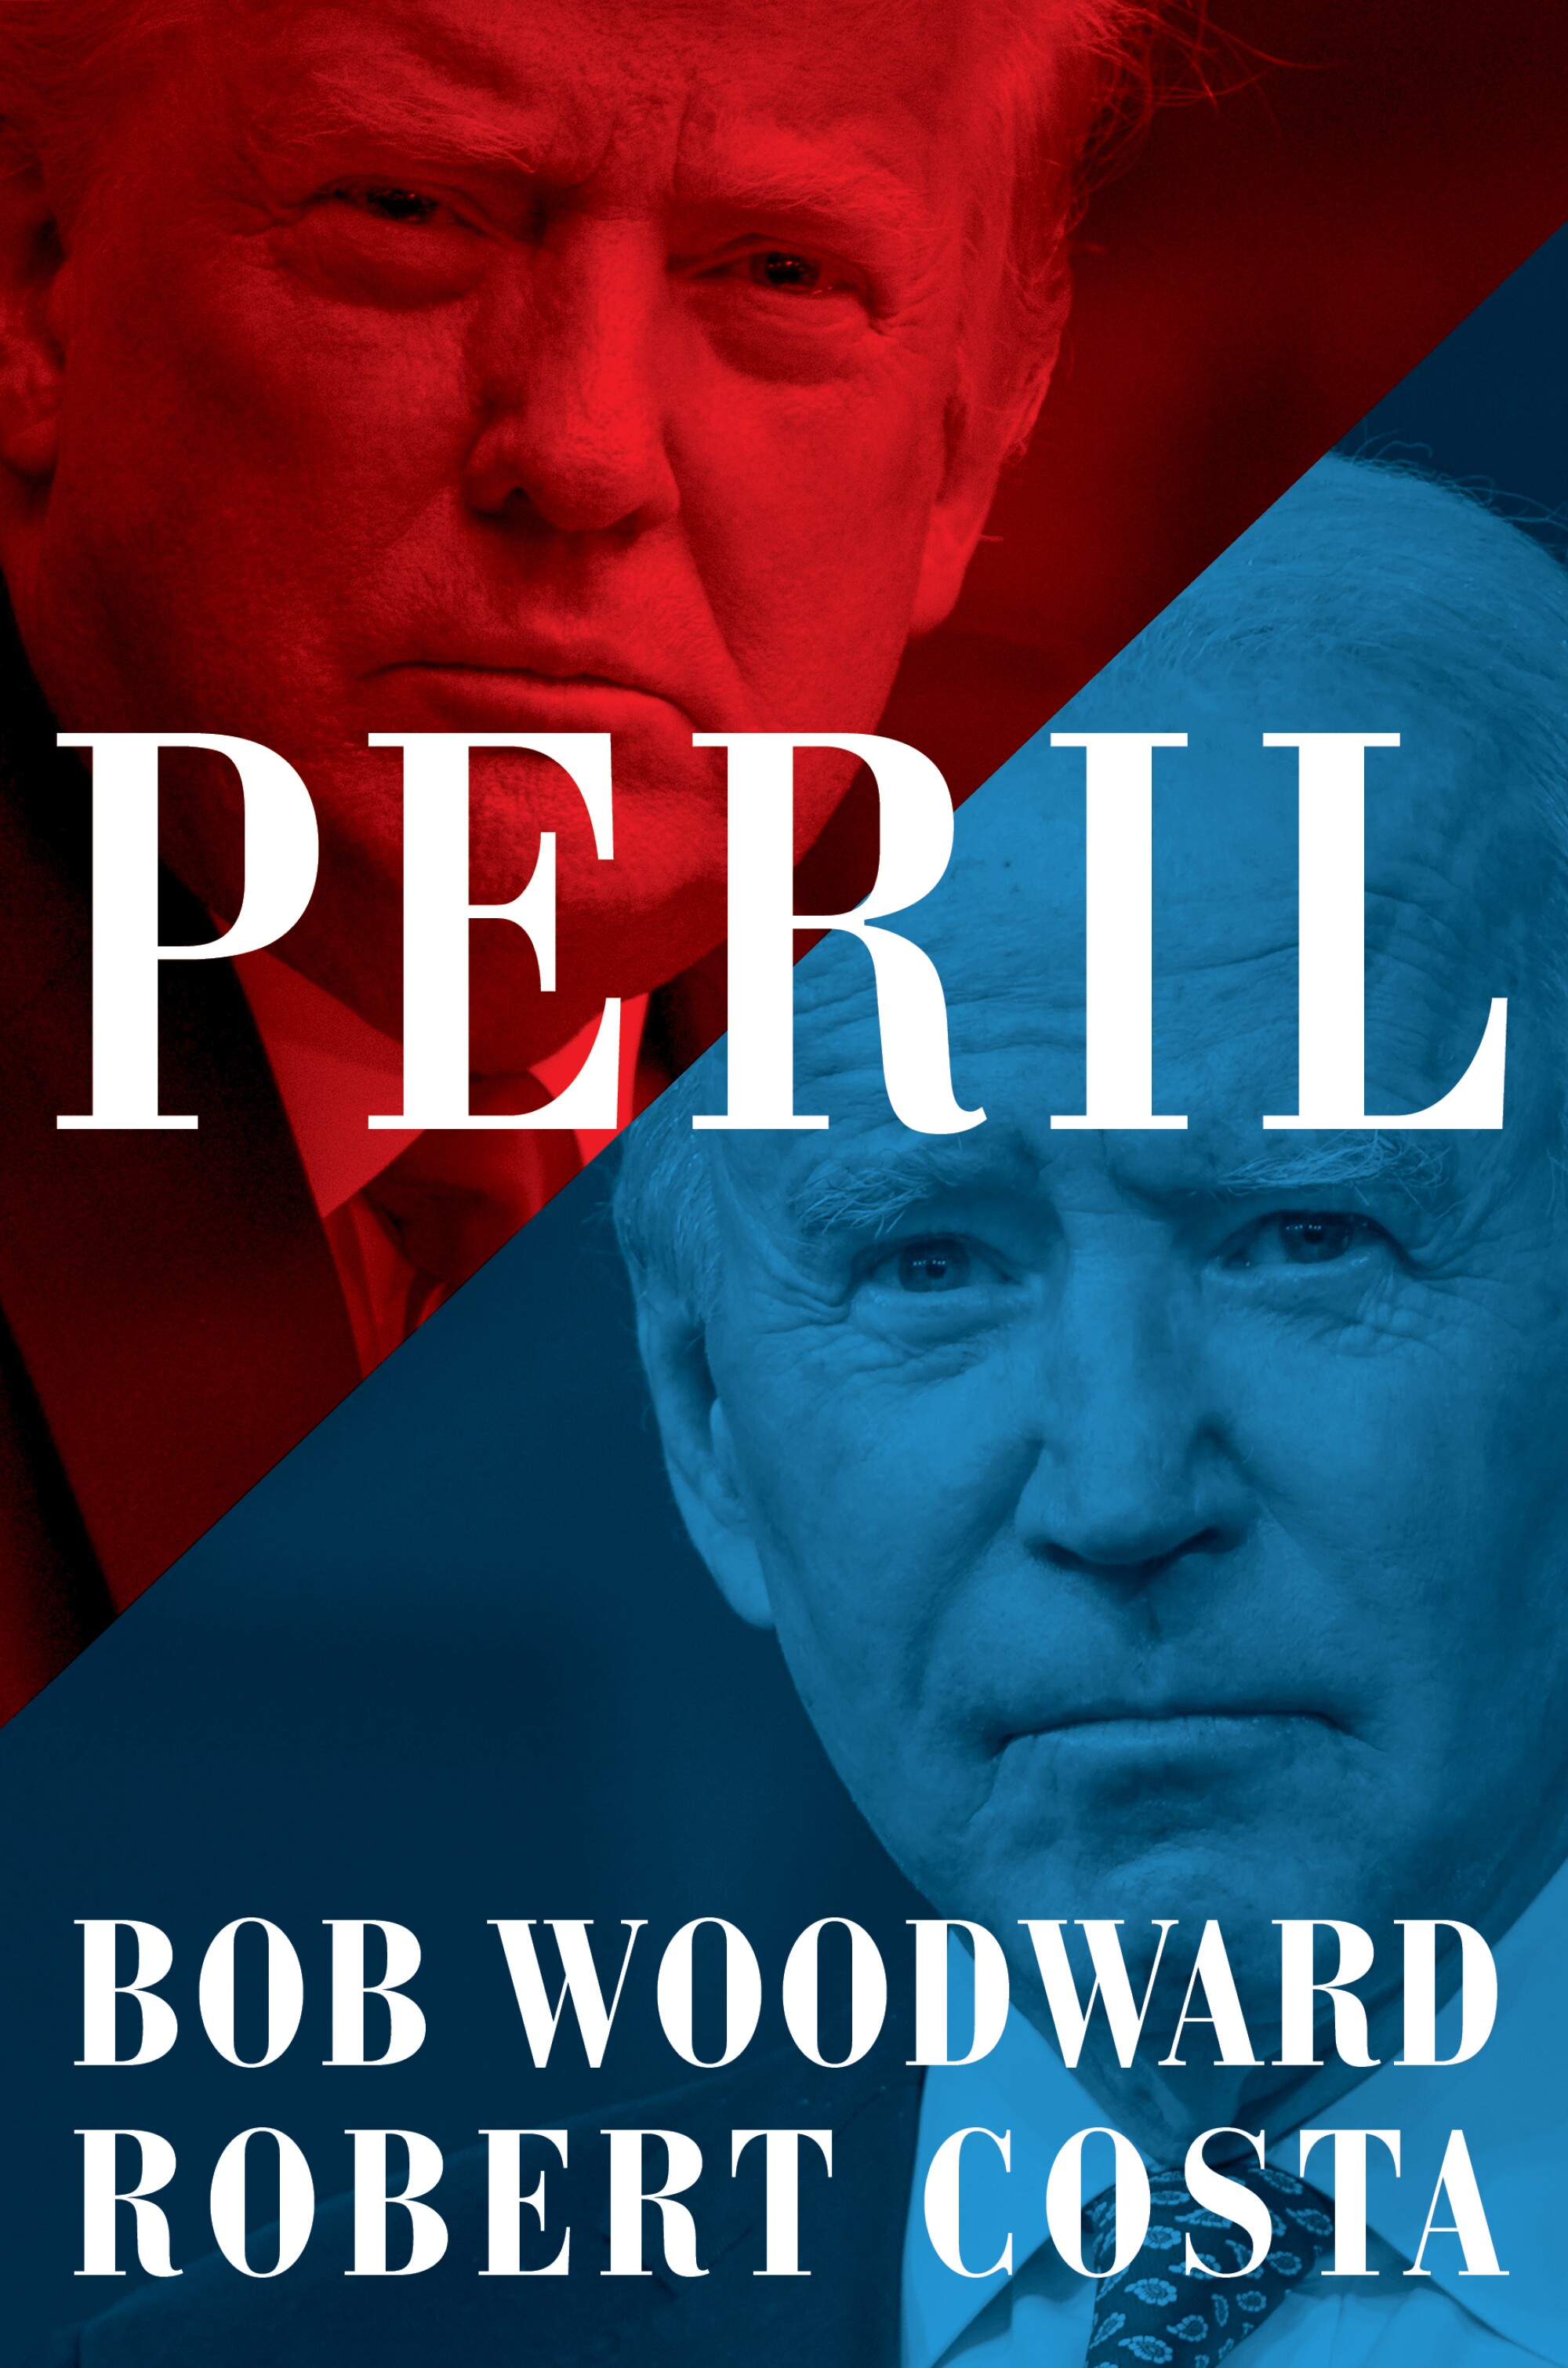 A split image of Donald Trump in red and President Joe Biden in blue on the cover of 